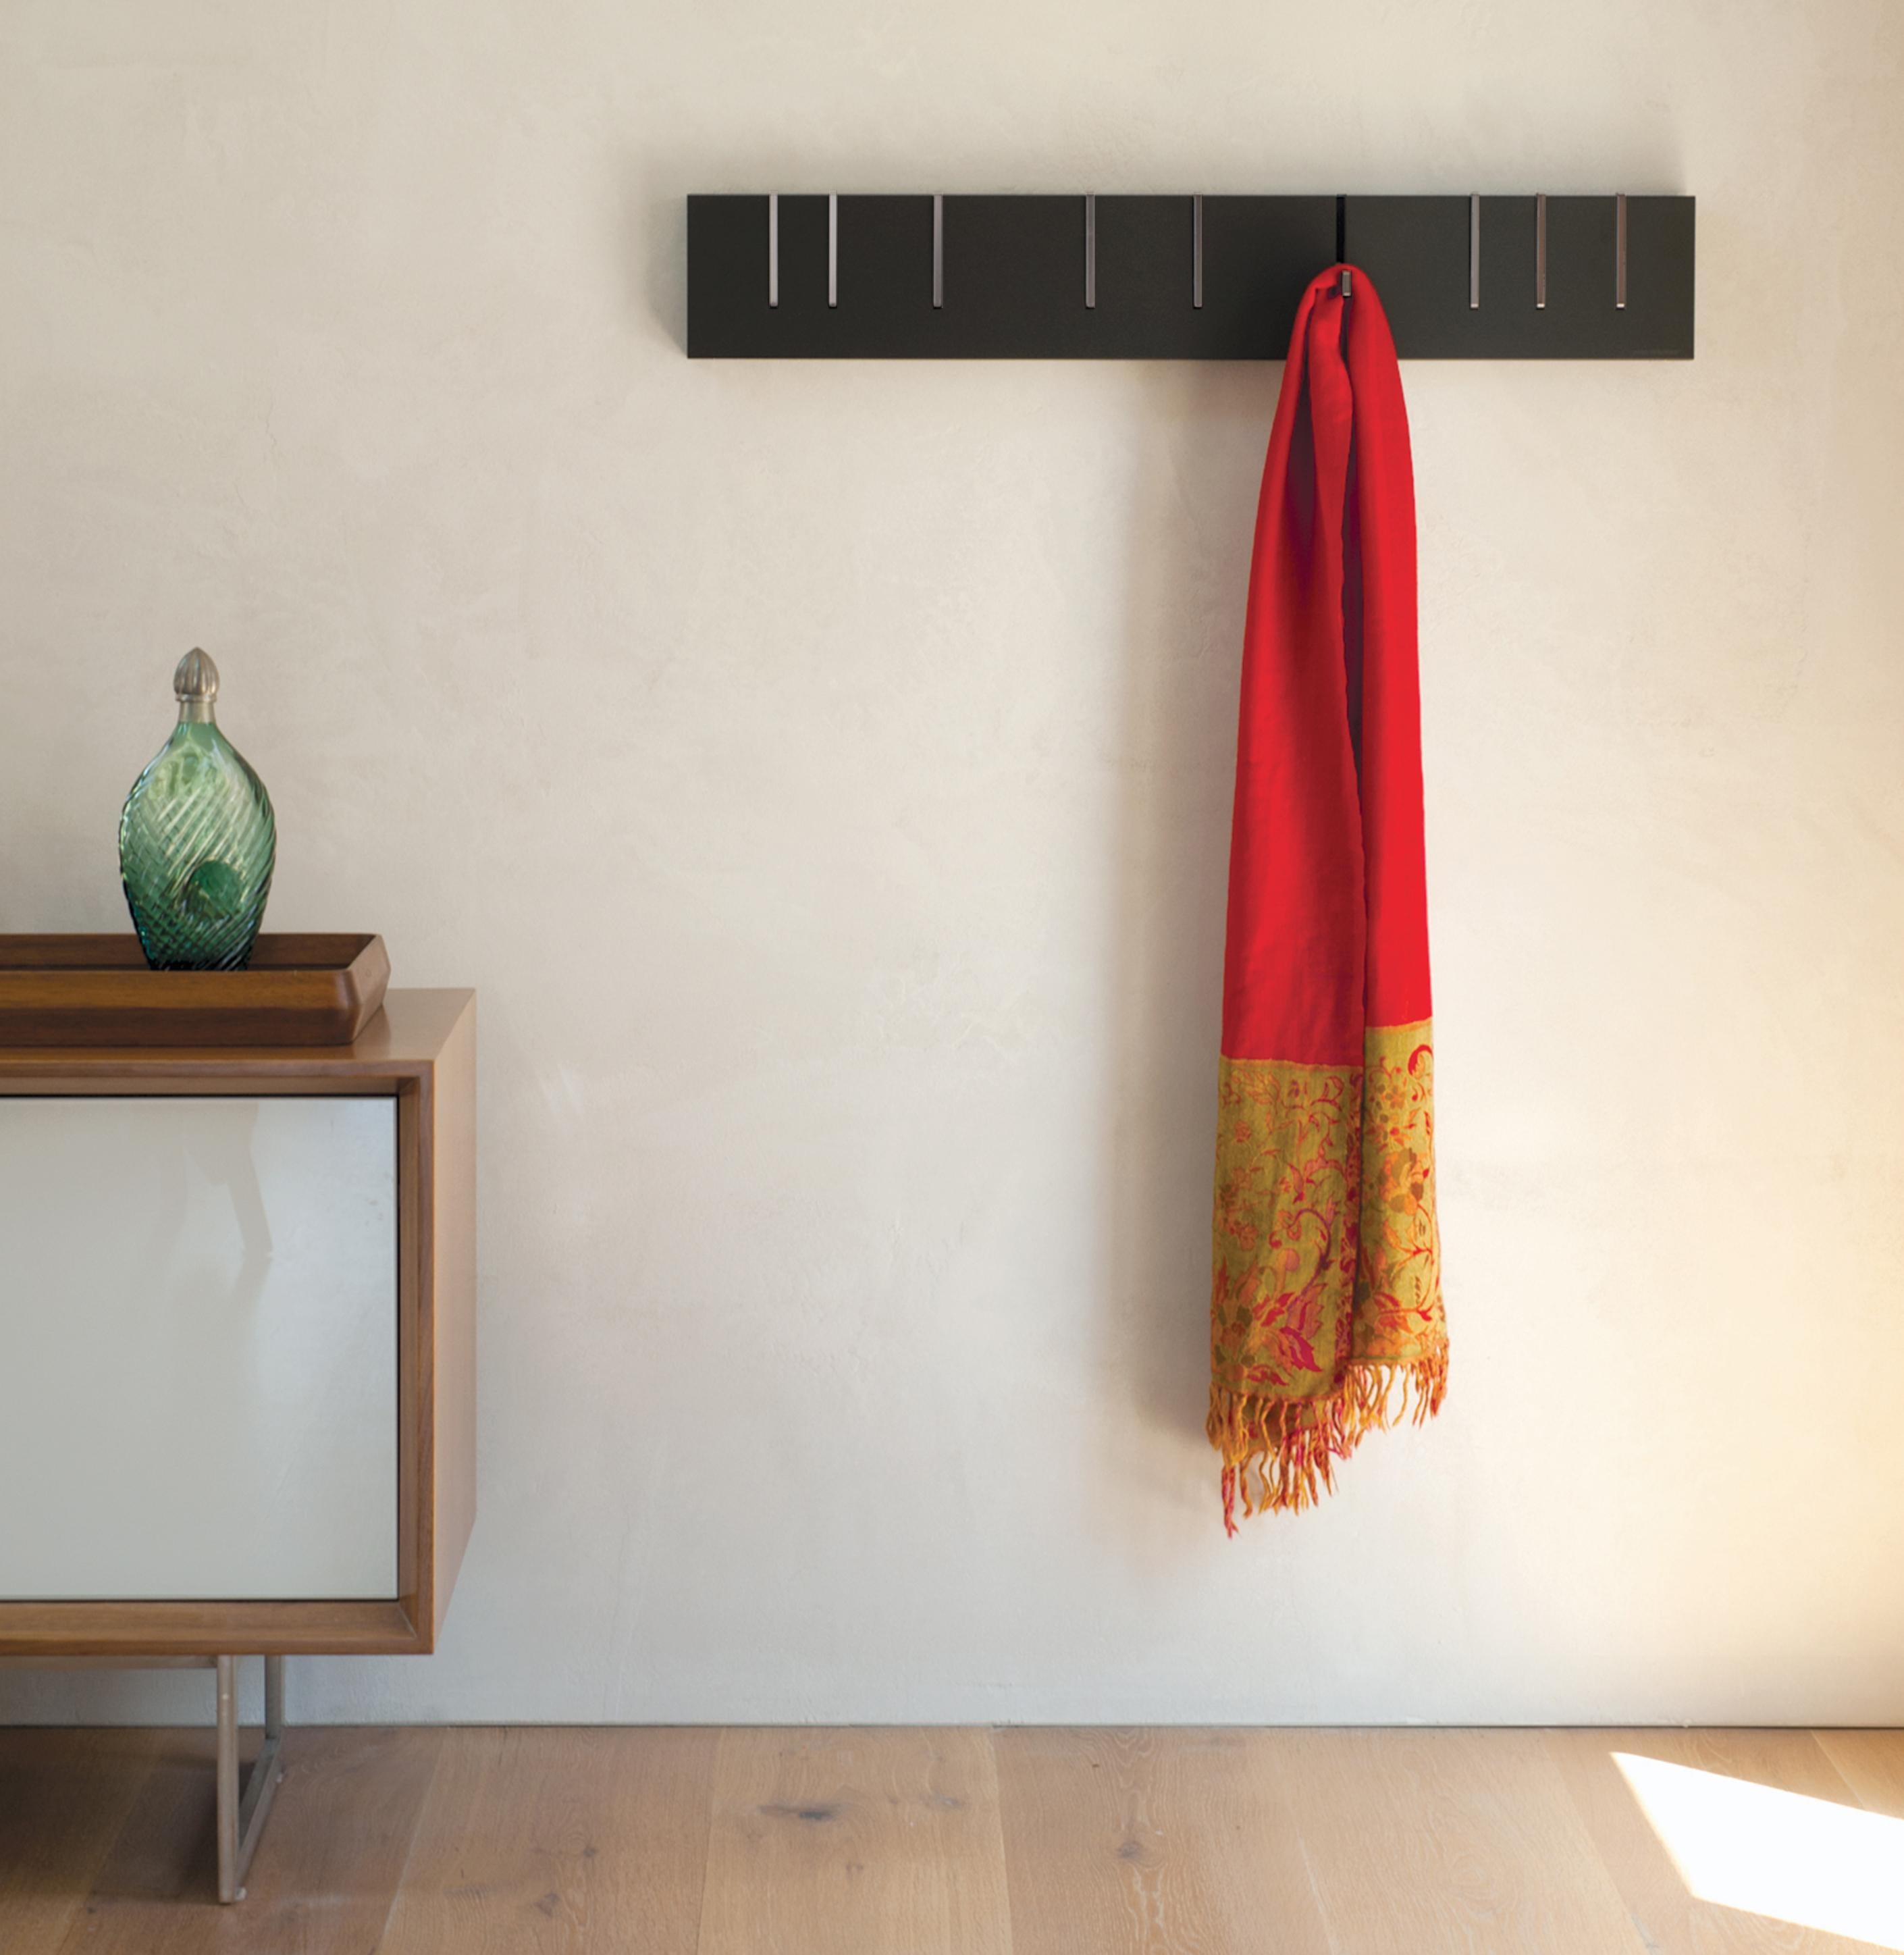 The iconic coat rack that functions as both a practical storage solution and modern sculptural object. When not in use as a coat rack, the Symbol hangs on the wall as a purely aesthetic piece. When needed, the precision machined metal coat hooks